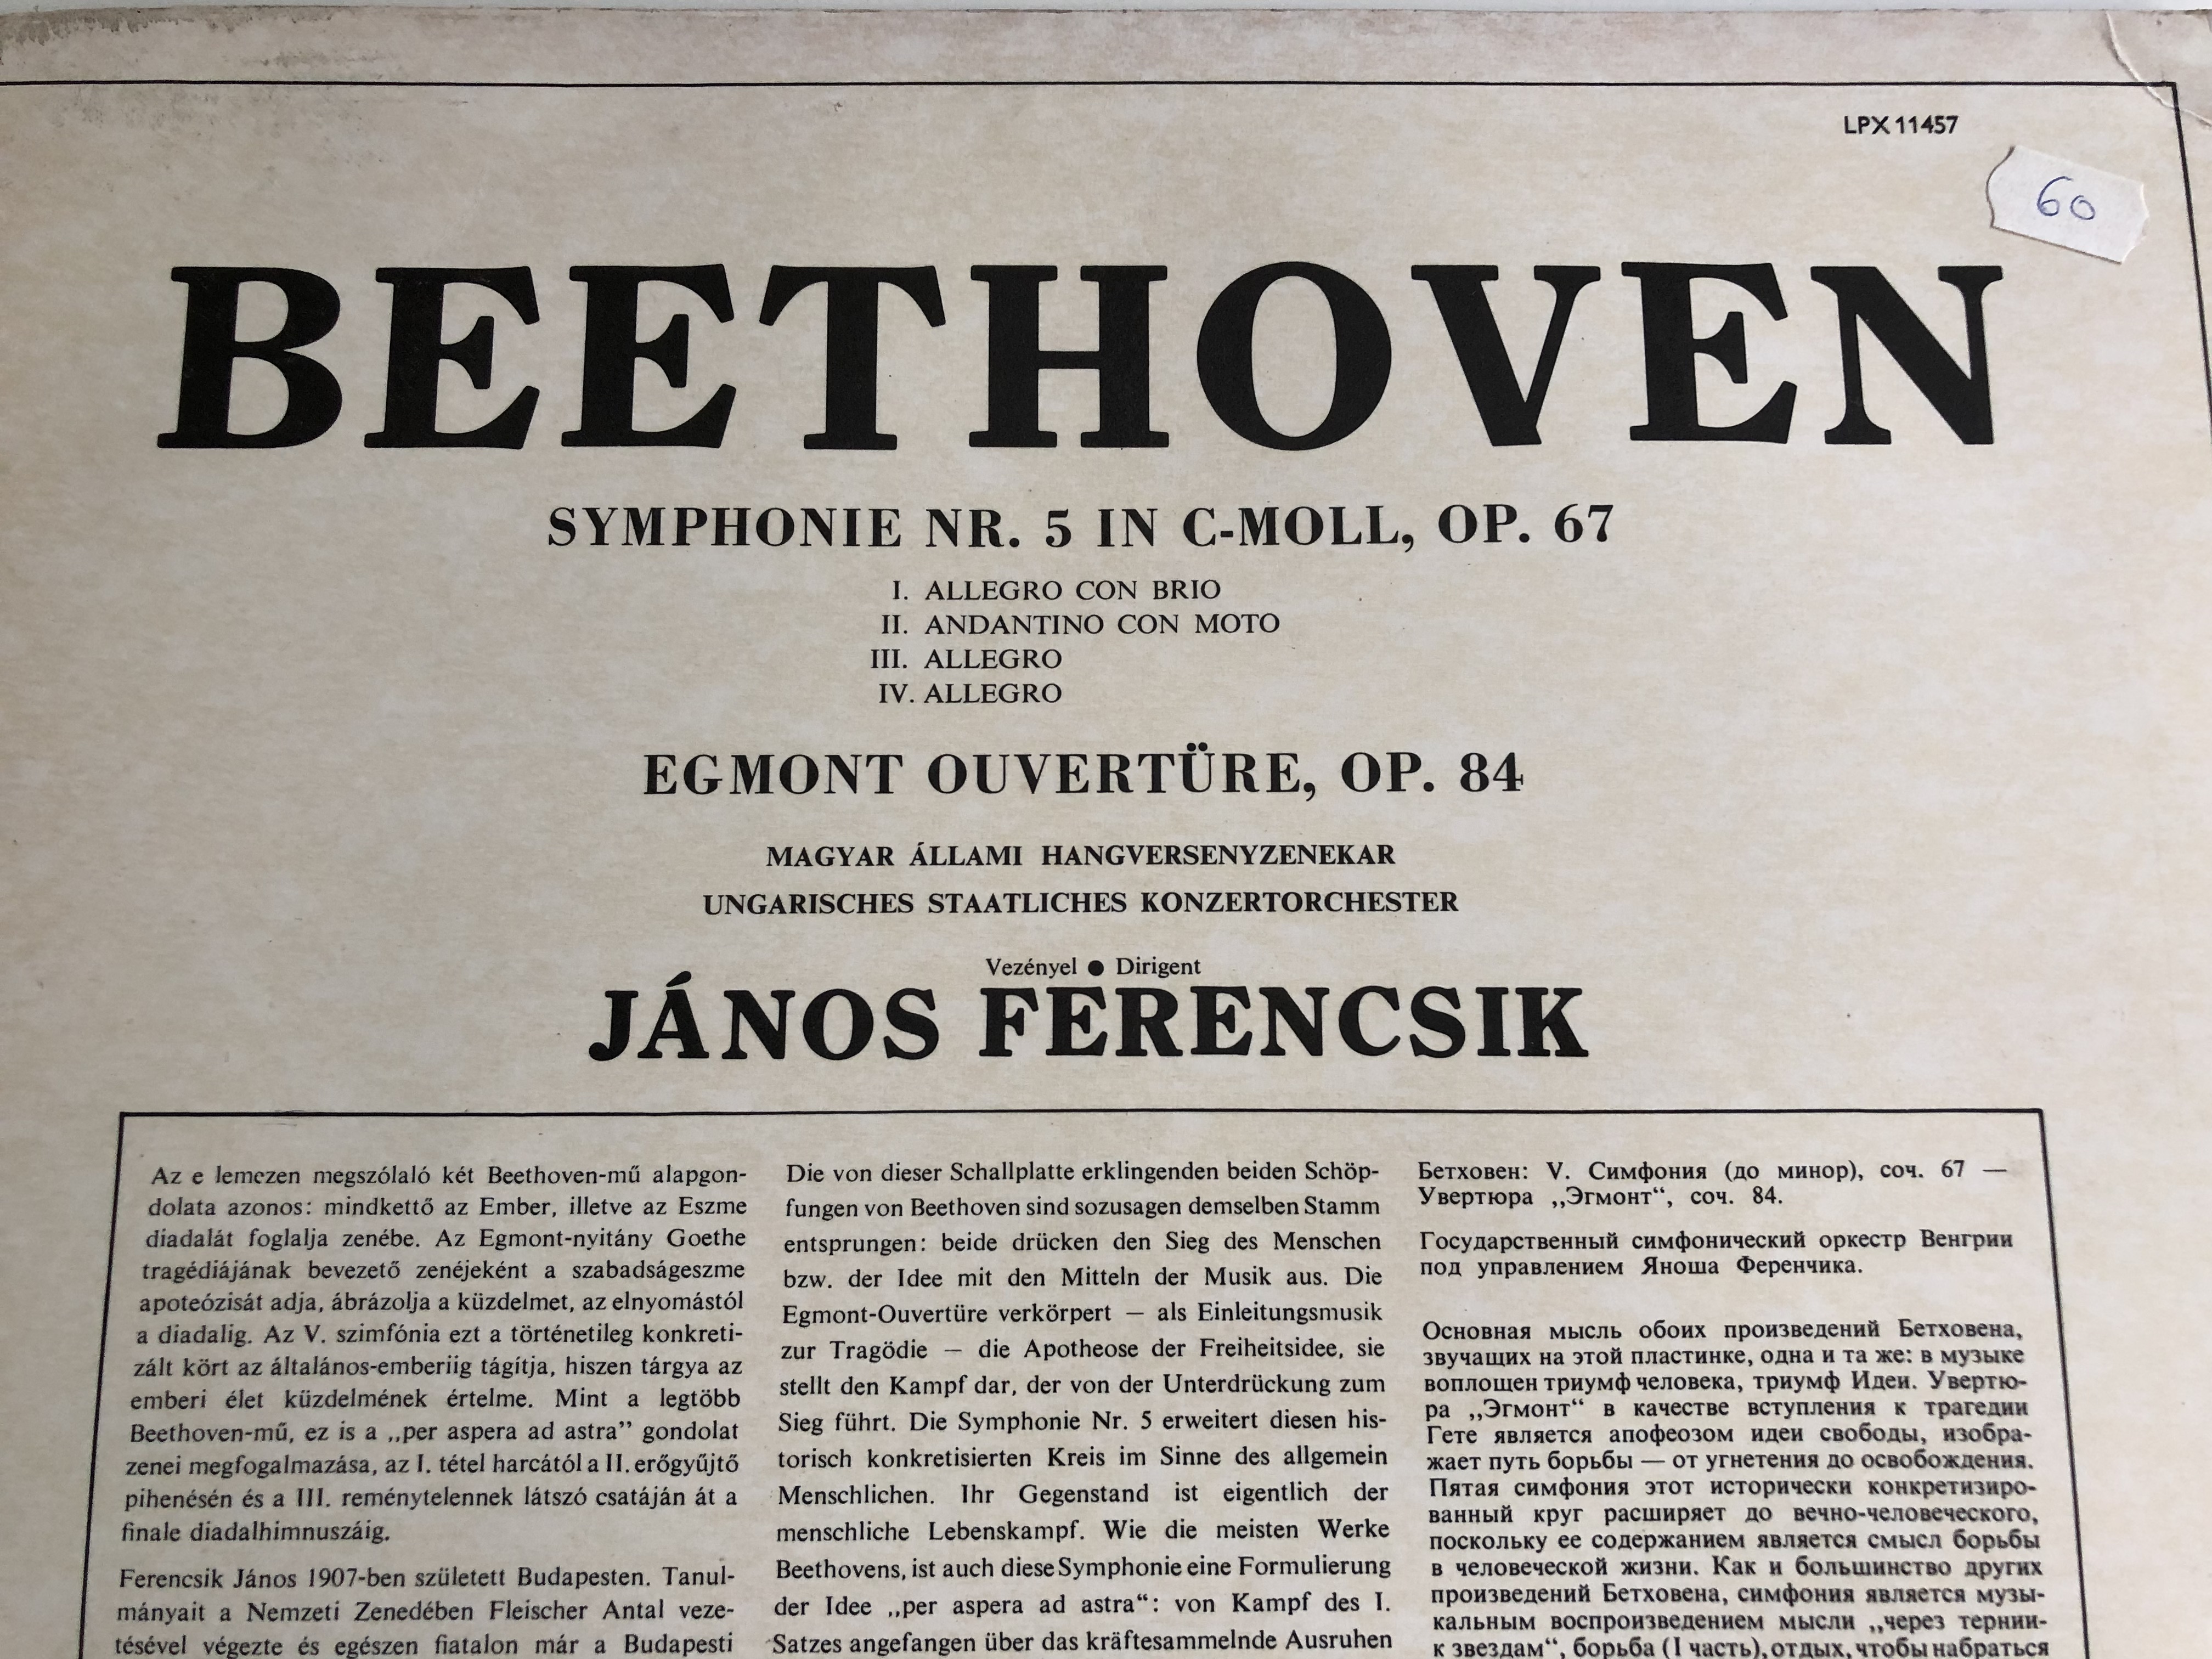 beethoven-symphonie-nr.-5-egmont-overture-ungarisches-staatliches-konzertorchester-conducted-j-nos-ferencsik-hungaroton-lp-stereo-mono-lpx-11457-3-.jpg